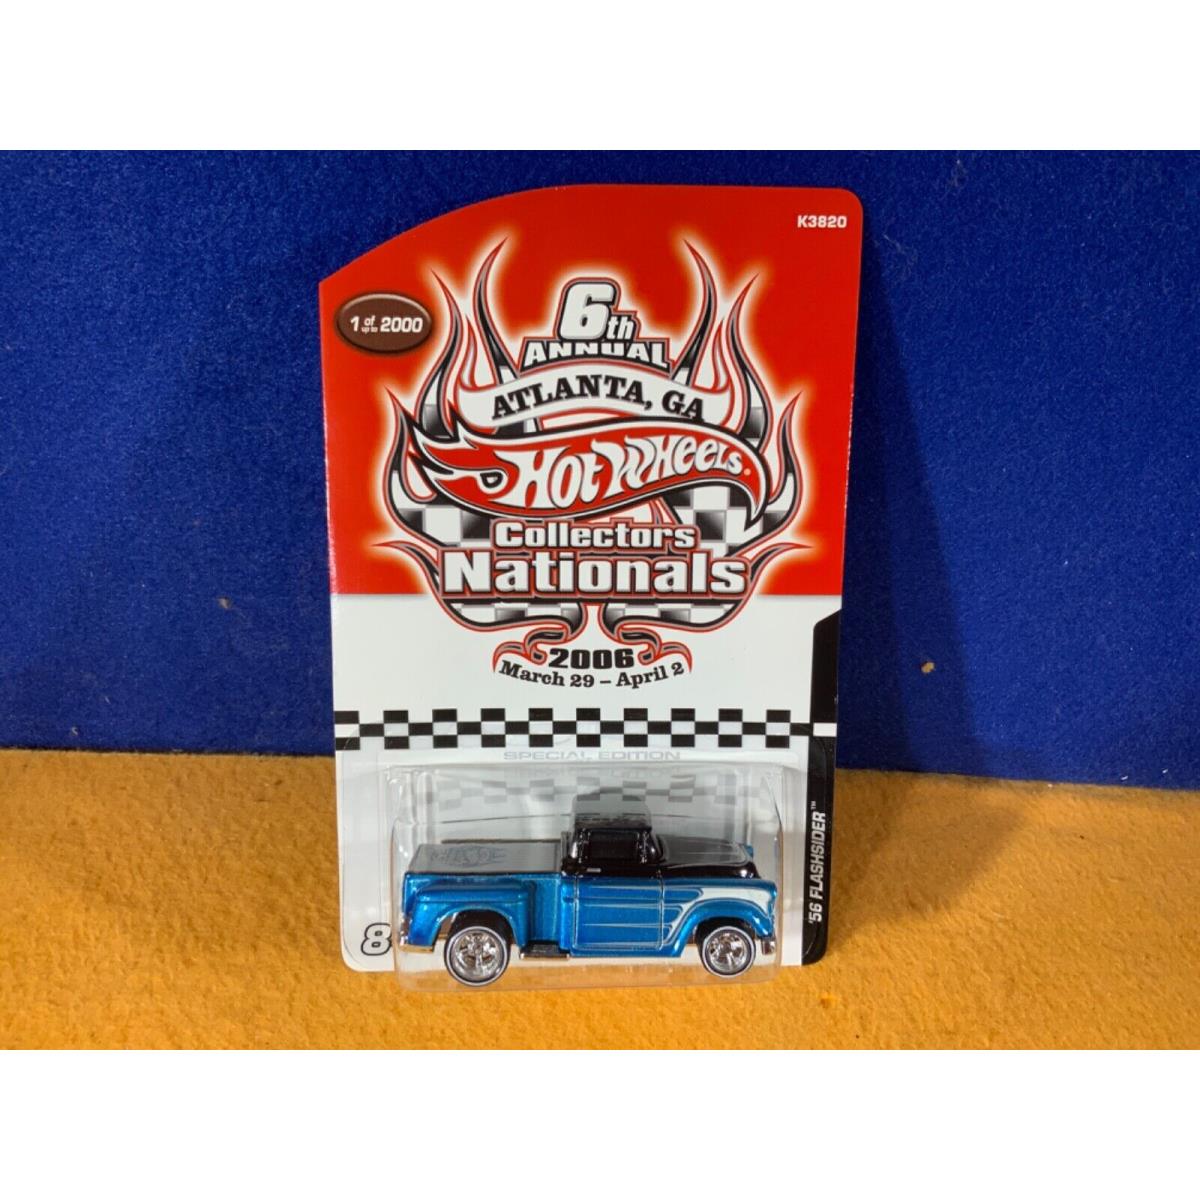 L9-34 Hot Wheels 6th Collectors National - 56 Flashsider W/ Real Rider 2006